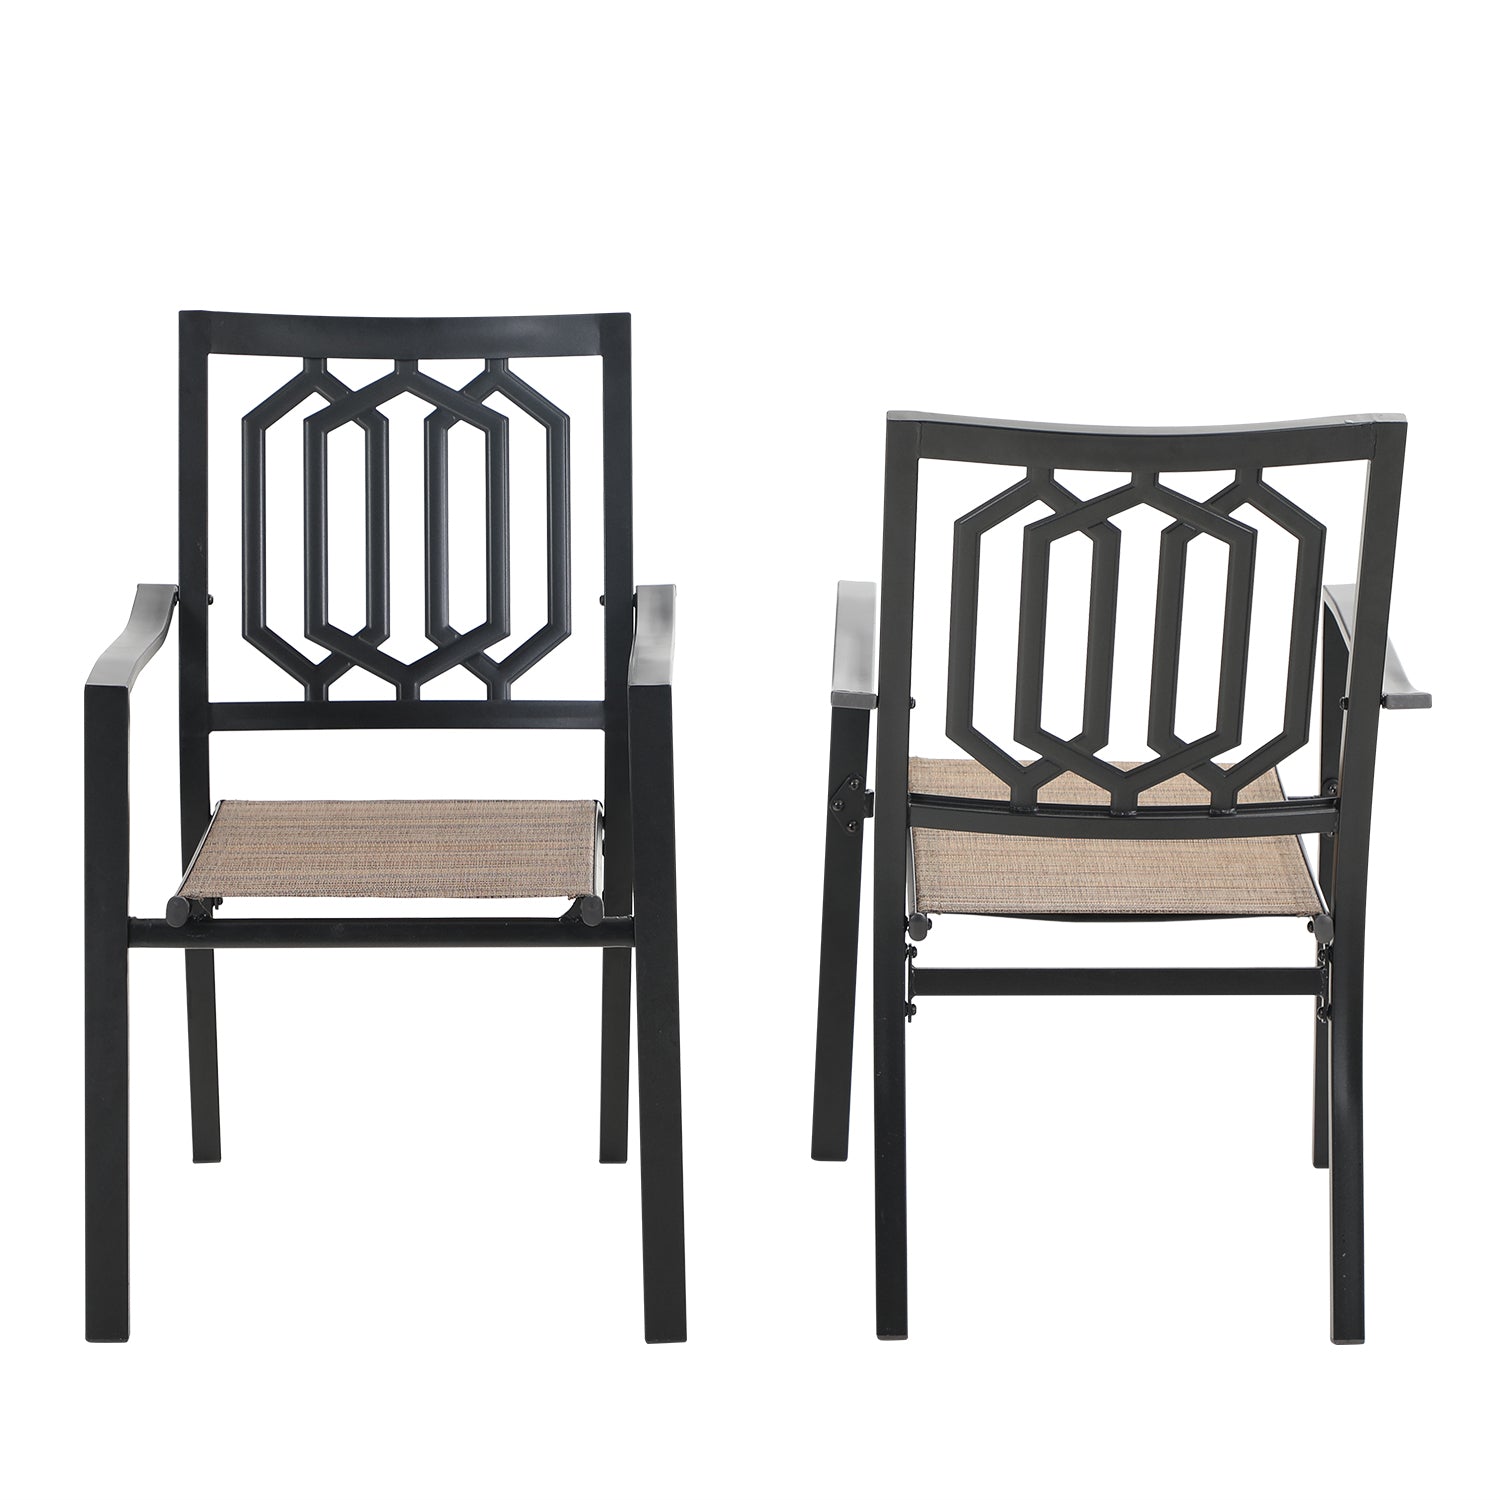 Sophia & William Textilene Seat Patio Dining Chairs with Steel Frame, Set of 4